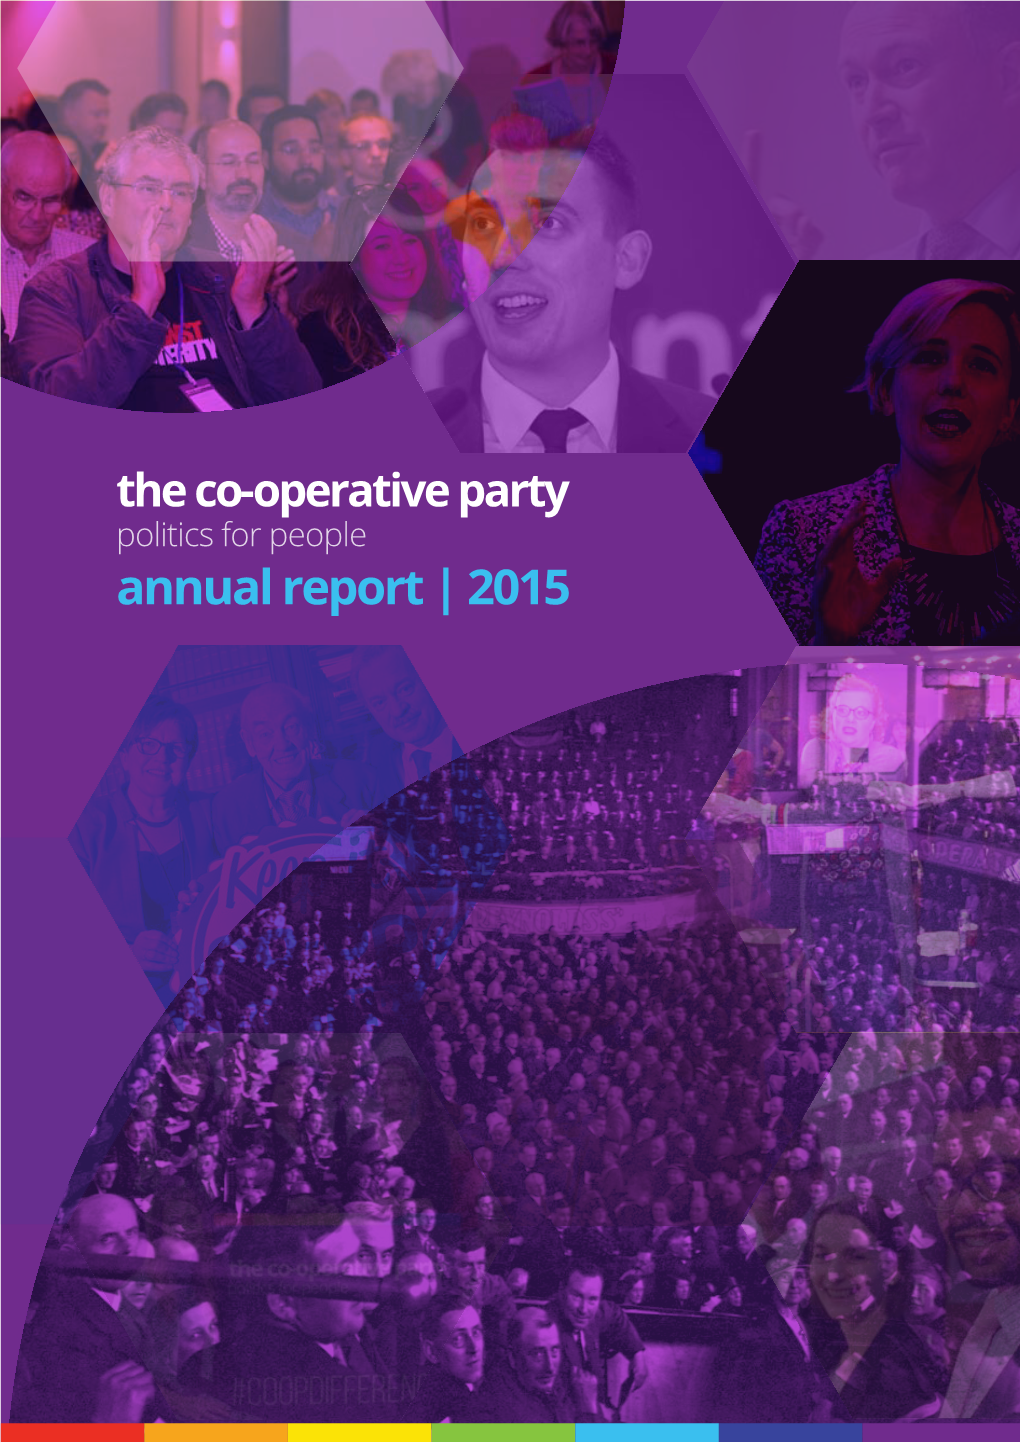 Annual Report 2015 the Co-Operative Party the Co-Operative Party | Annual Report 2015 2015 the Co-Operative Party | Annual Report 2015